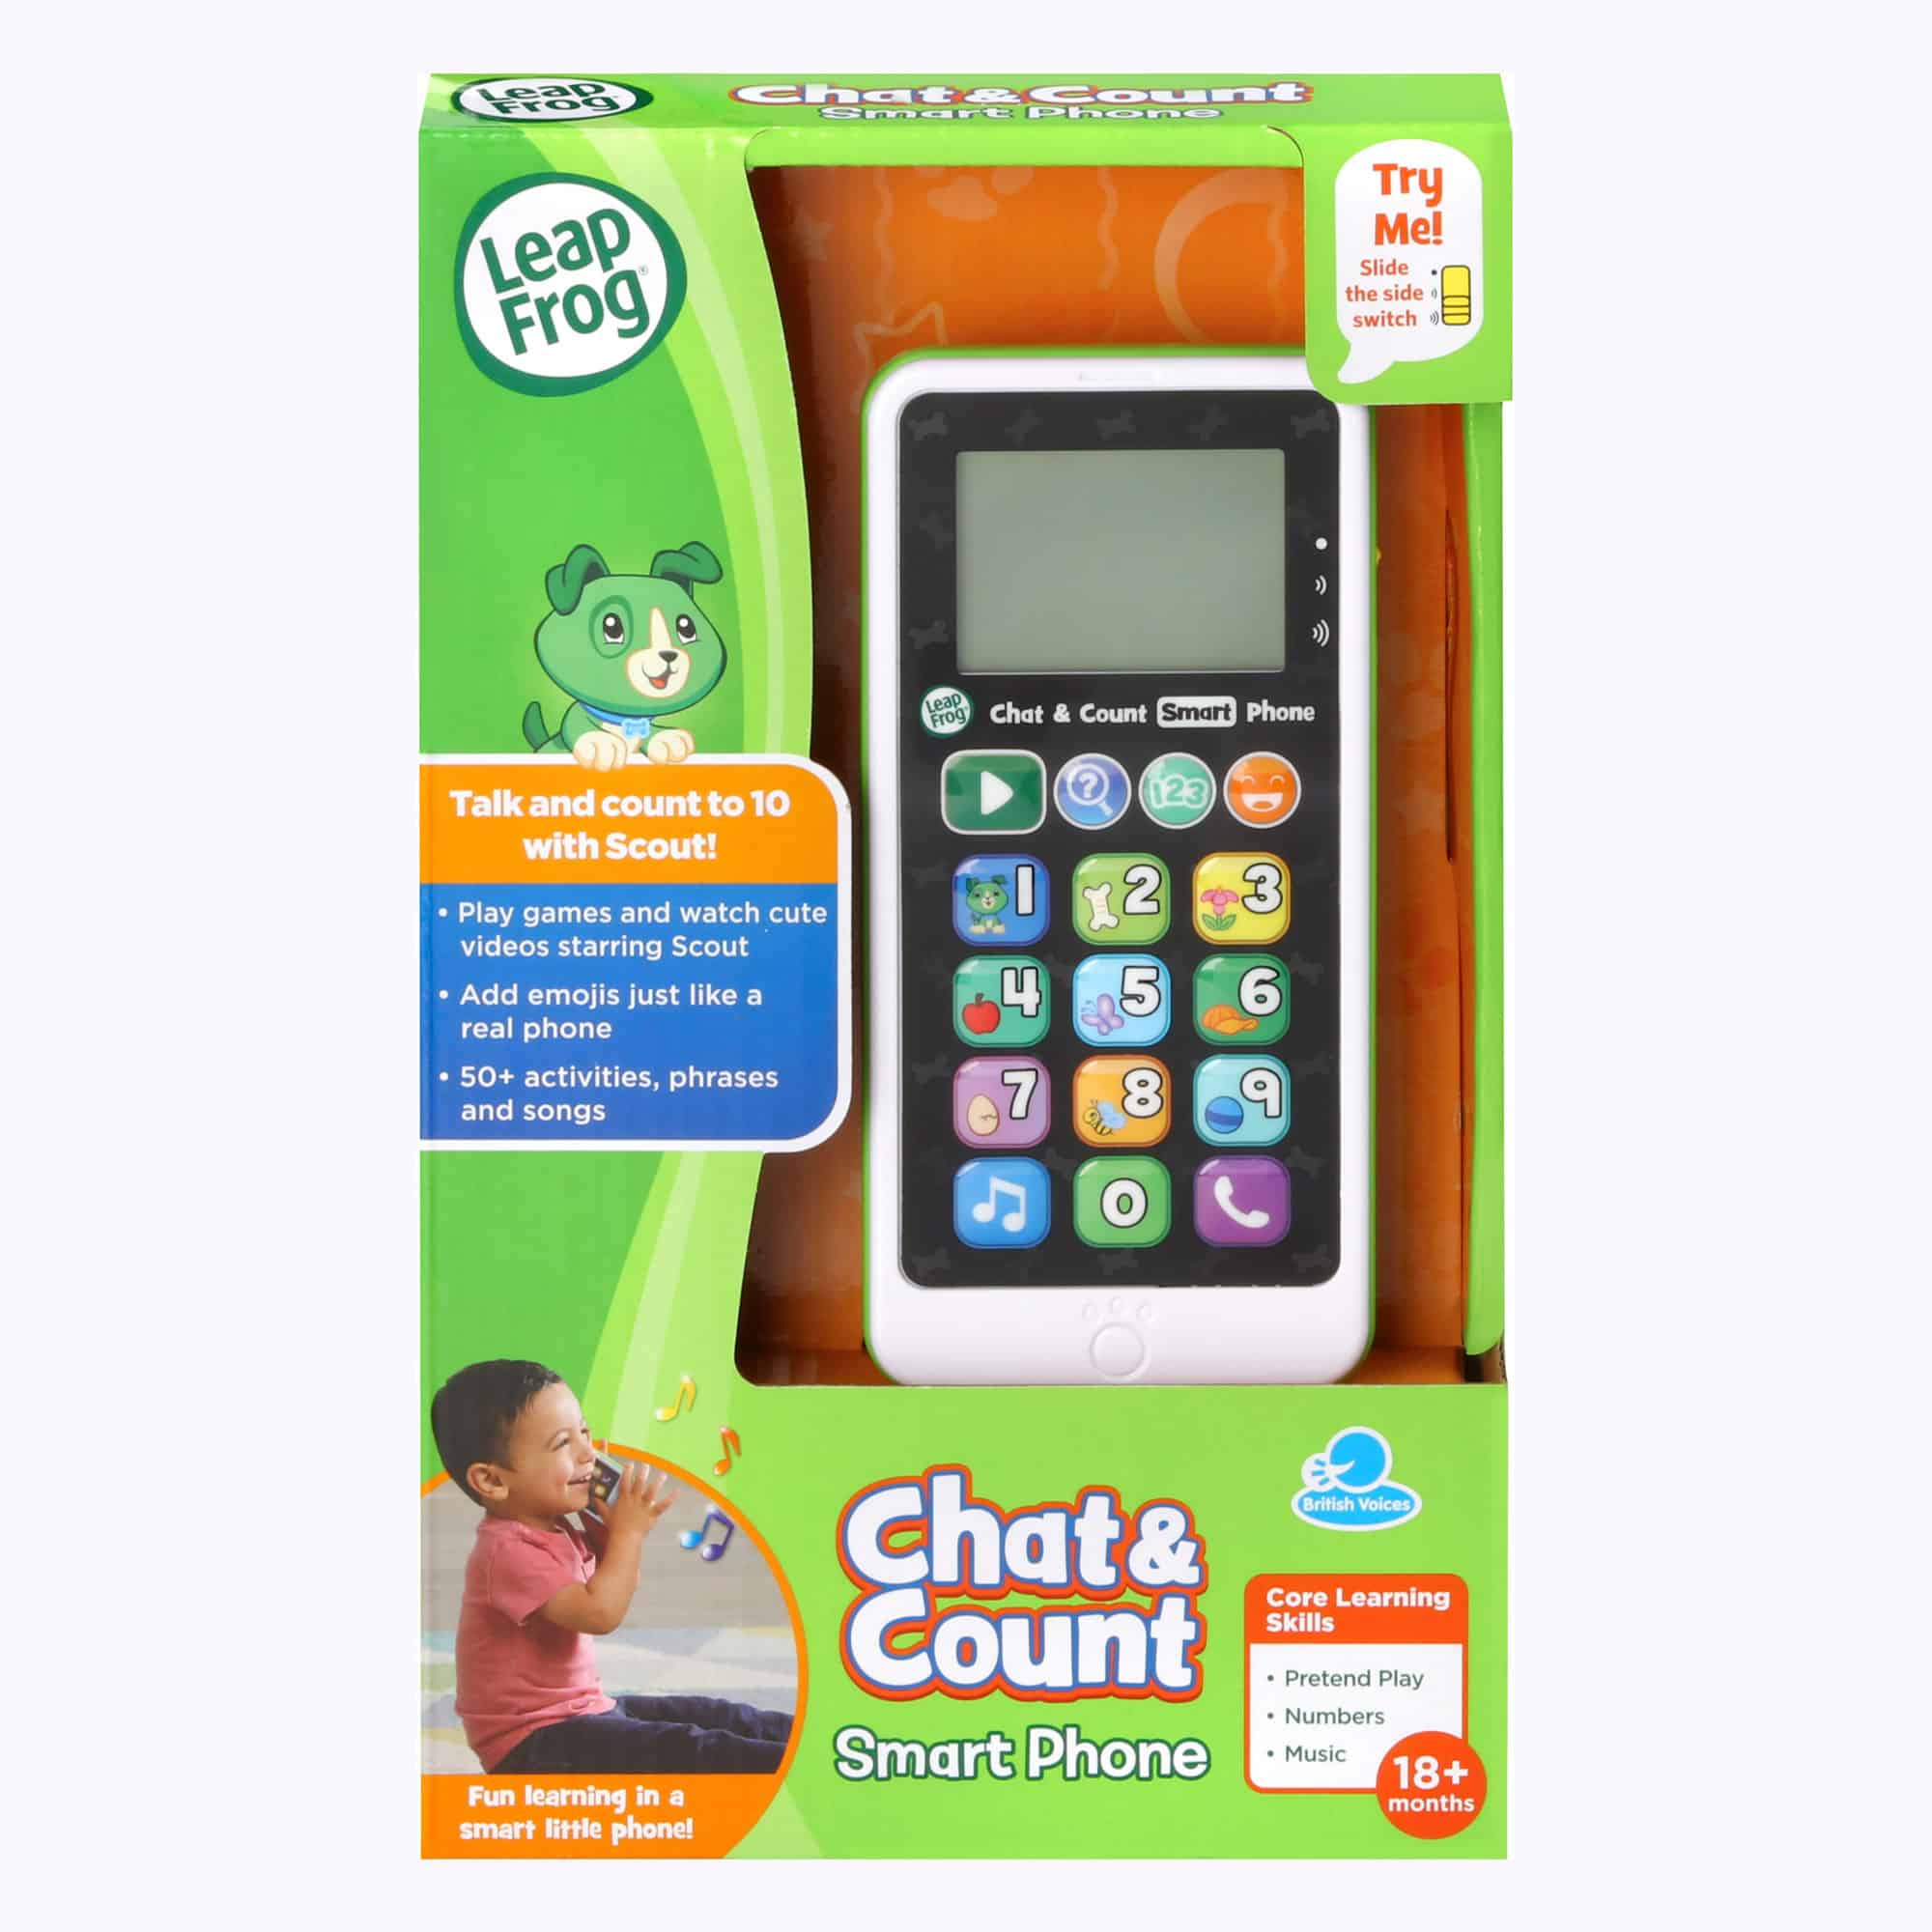 LeapFrog - Chat & Count Mobile Phone